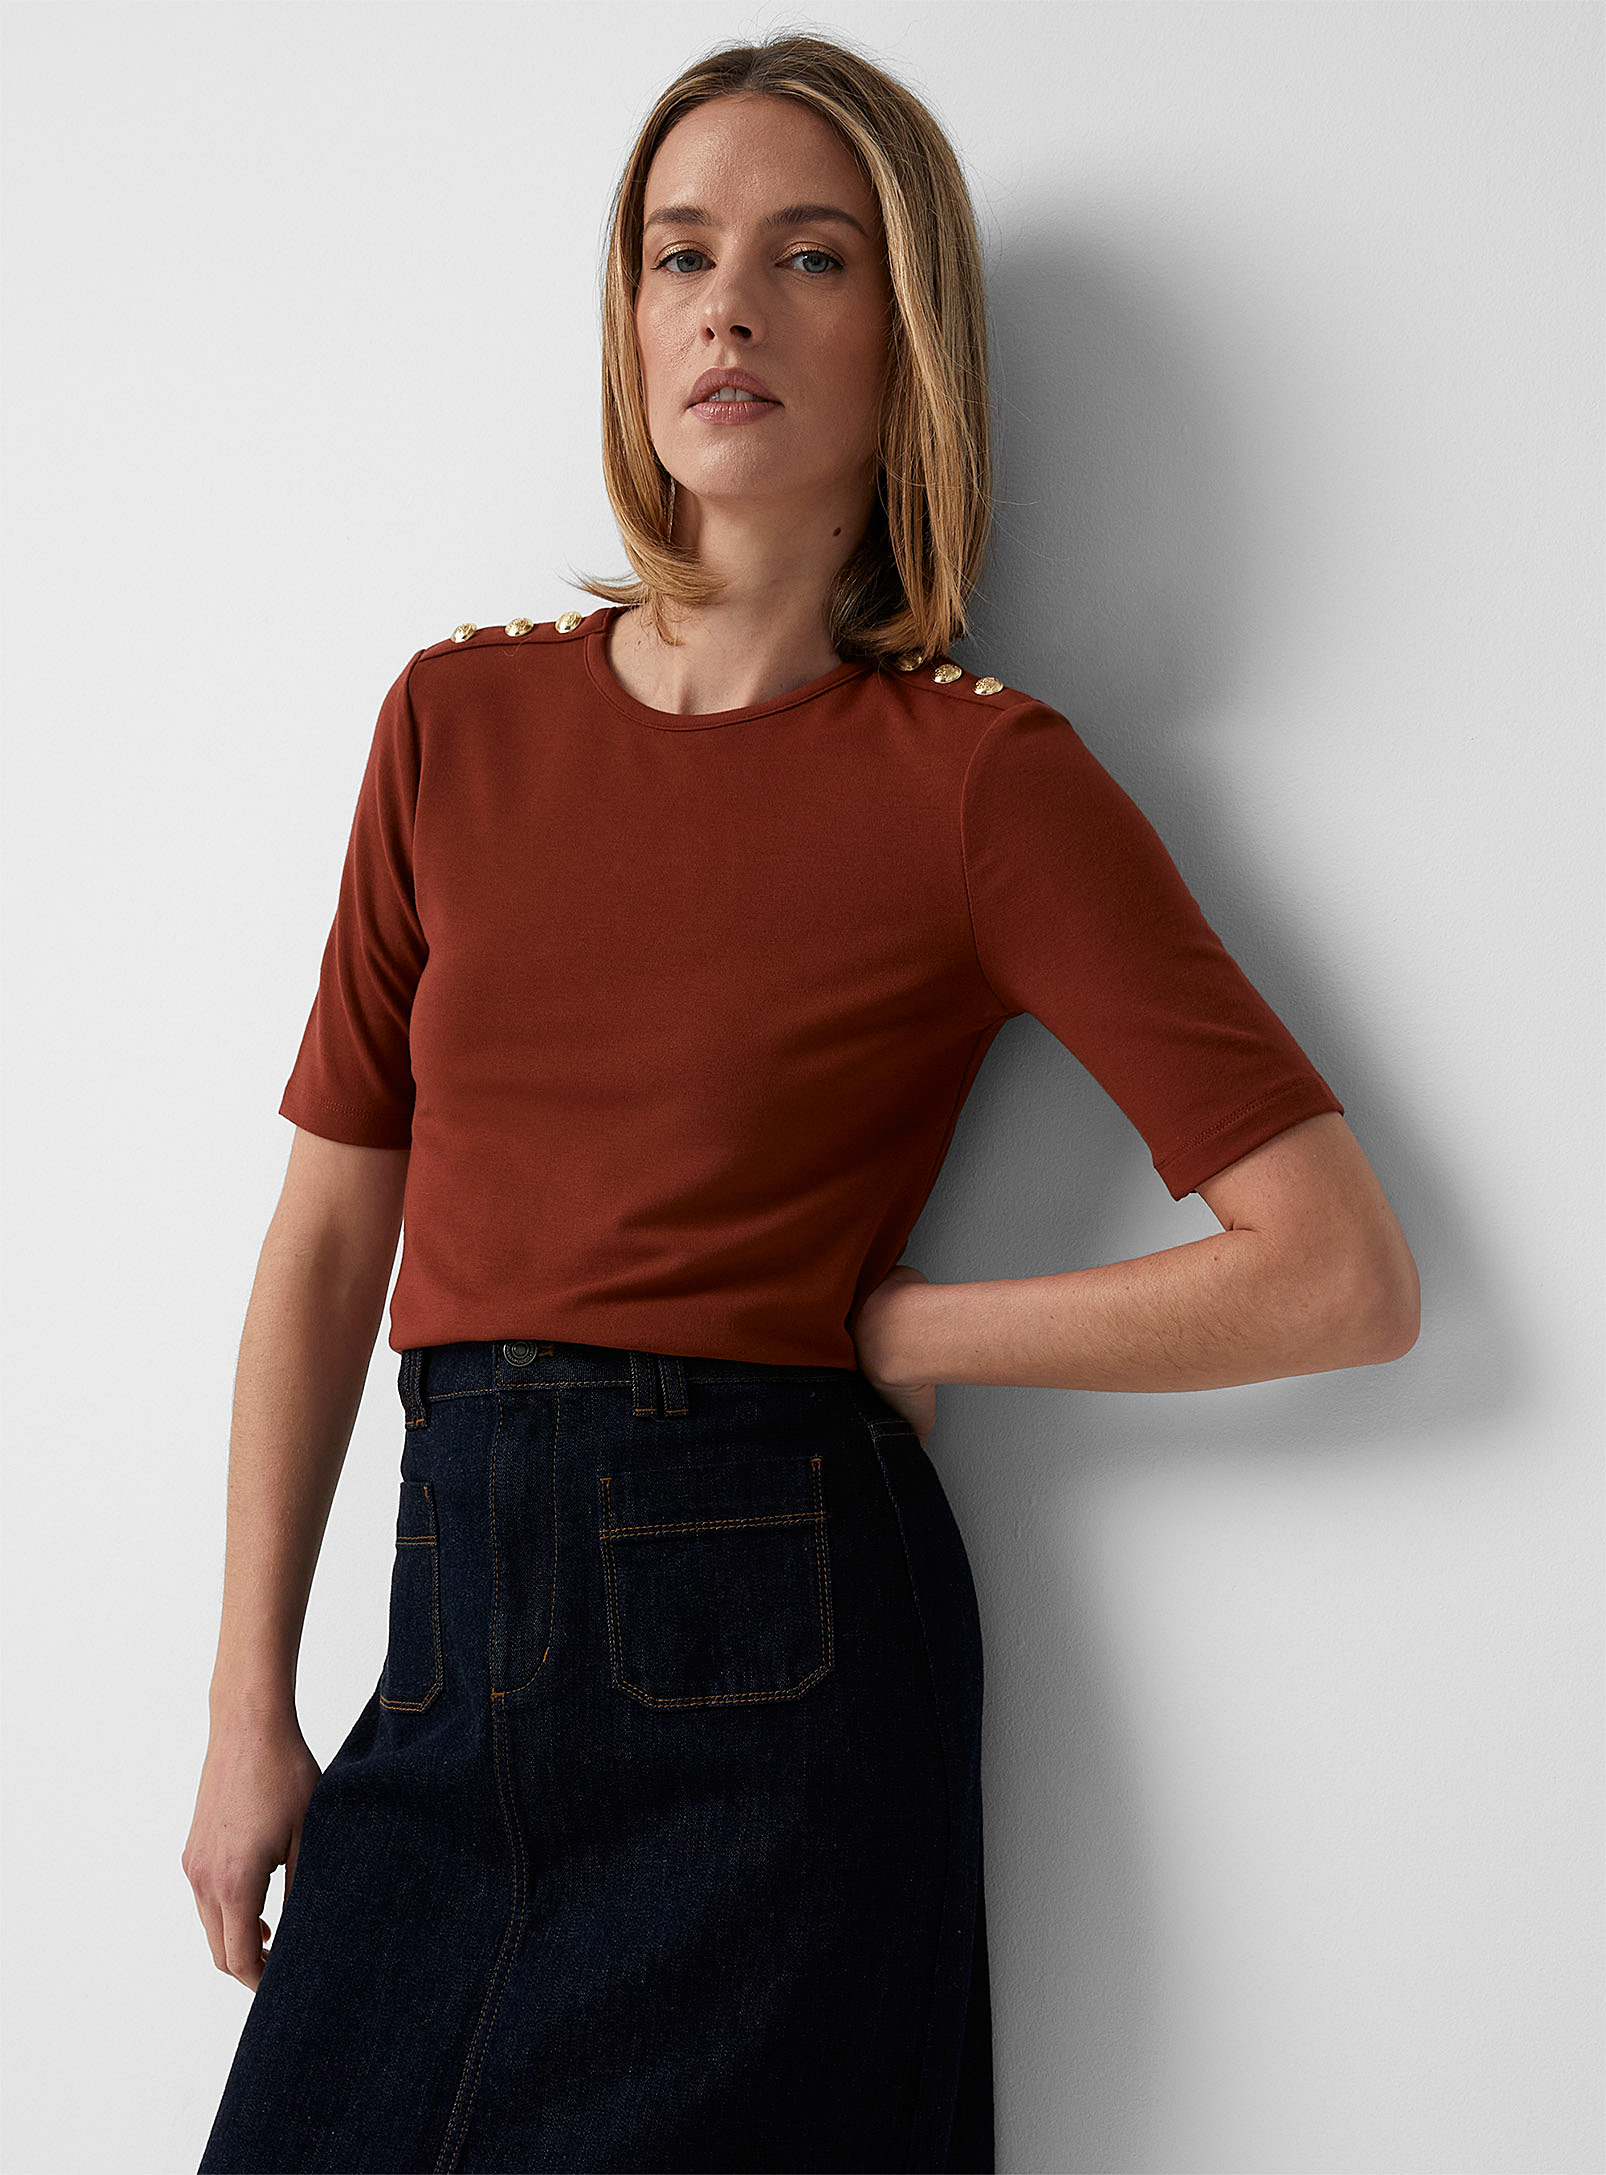 Contemporaine Buttoned Shoulders T-shirt In Medium Brown